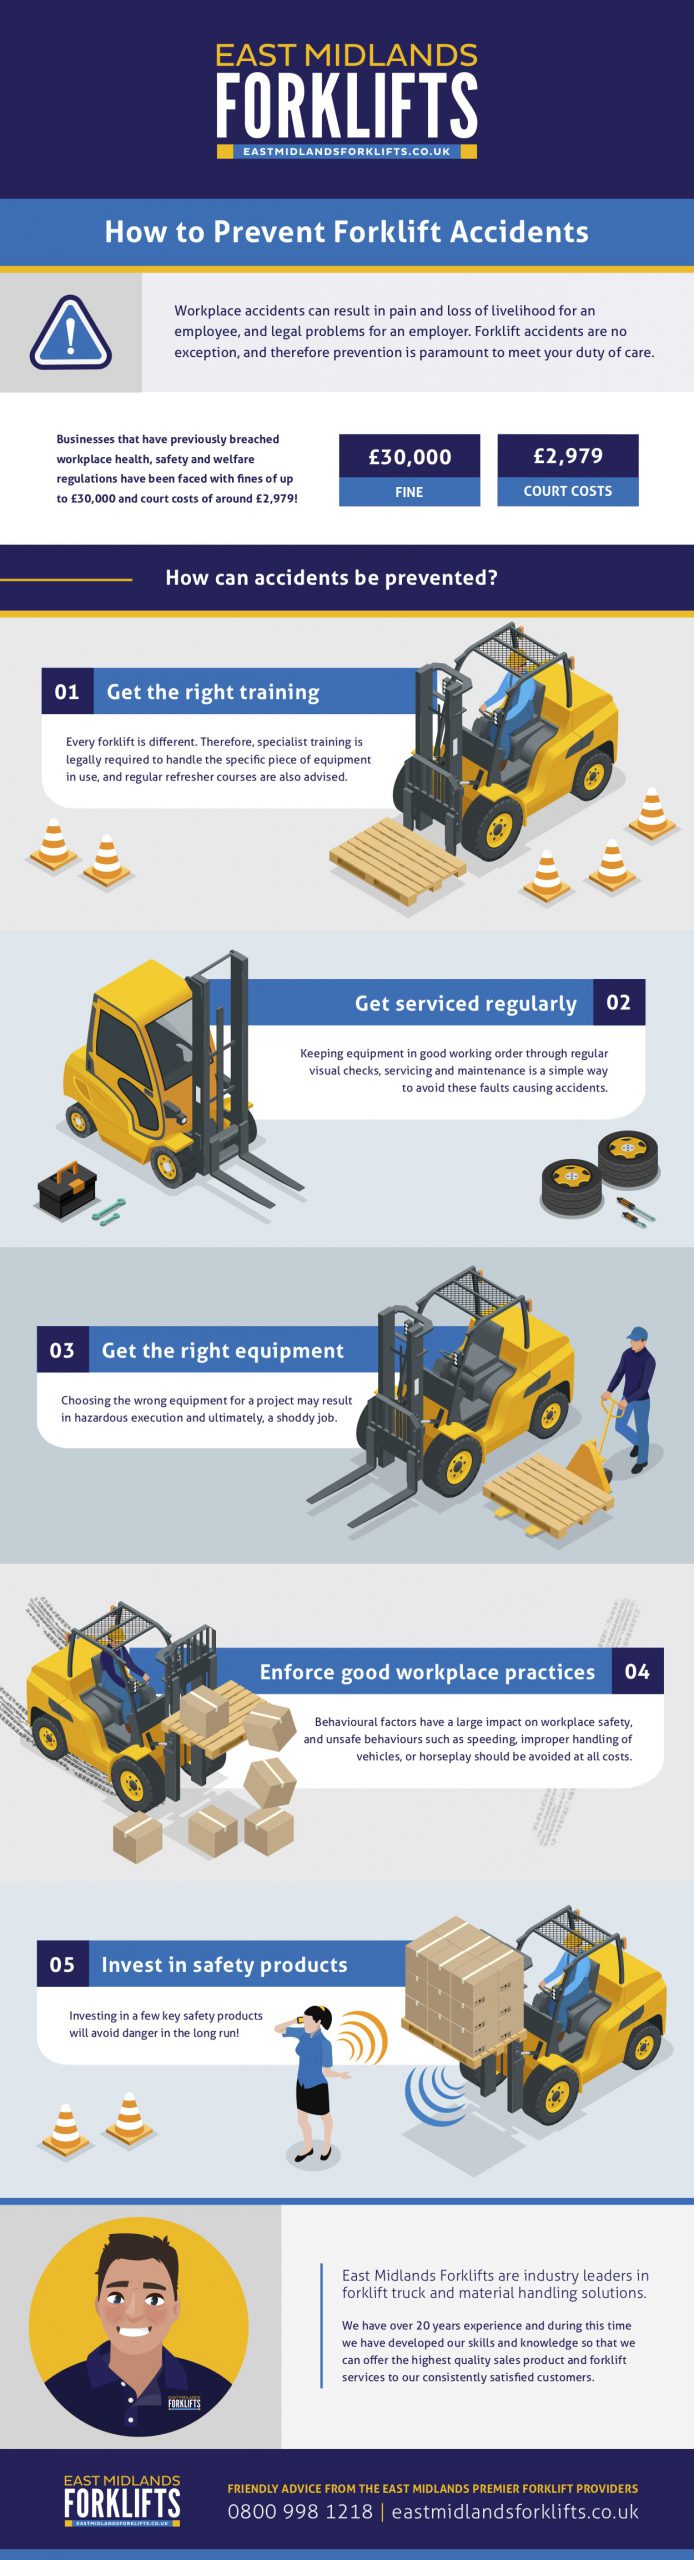 5 Ways To Prevent Forklift Accidents